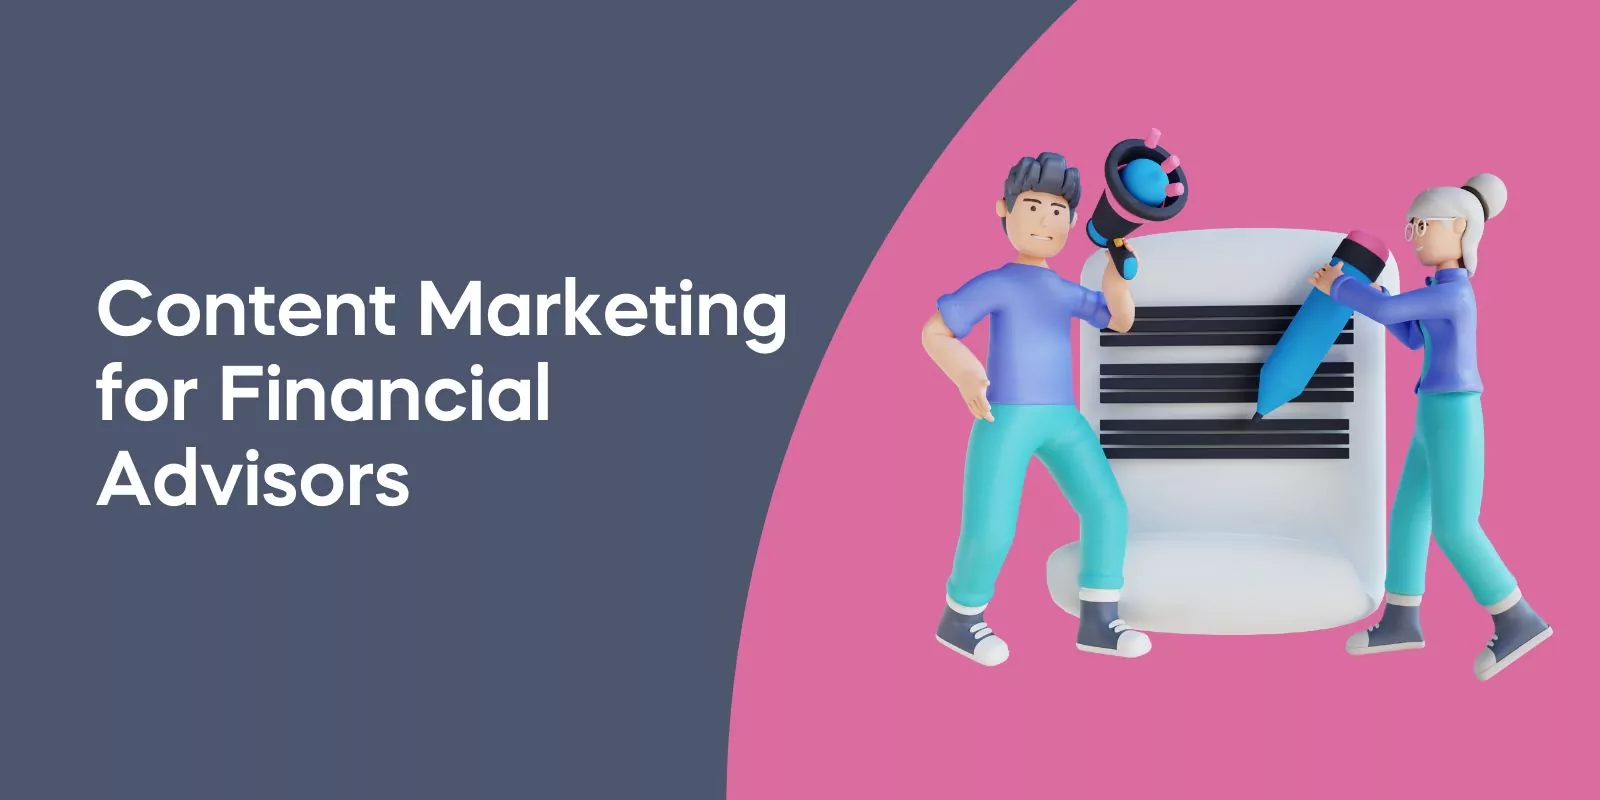 Content Marketing for Financial Advisors